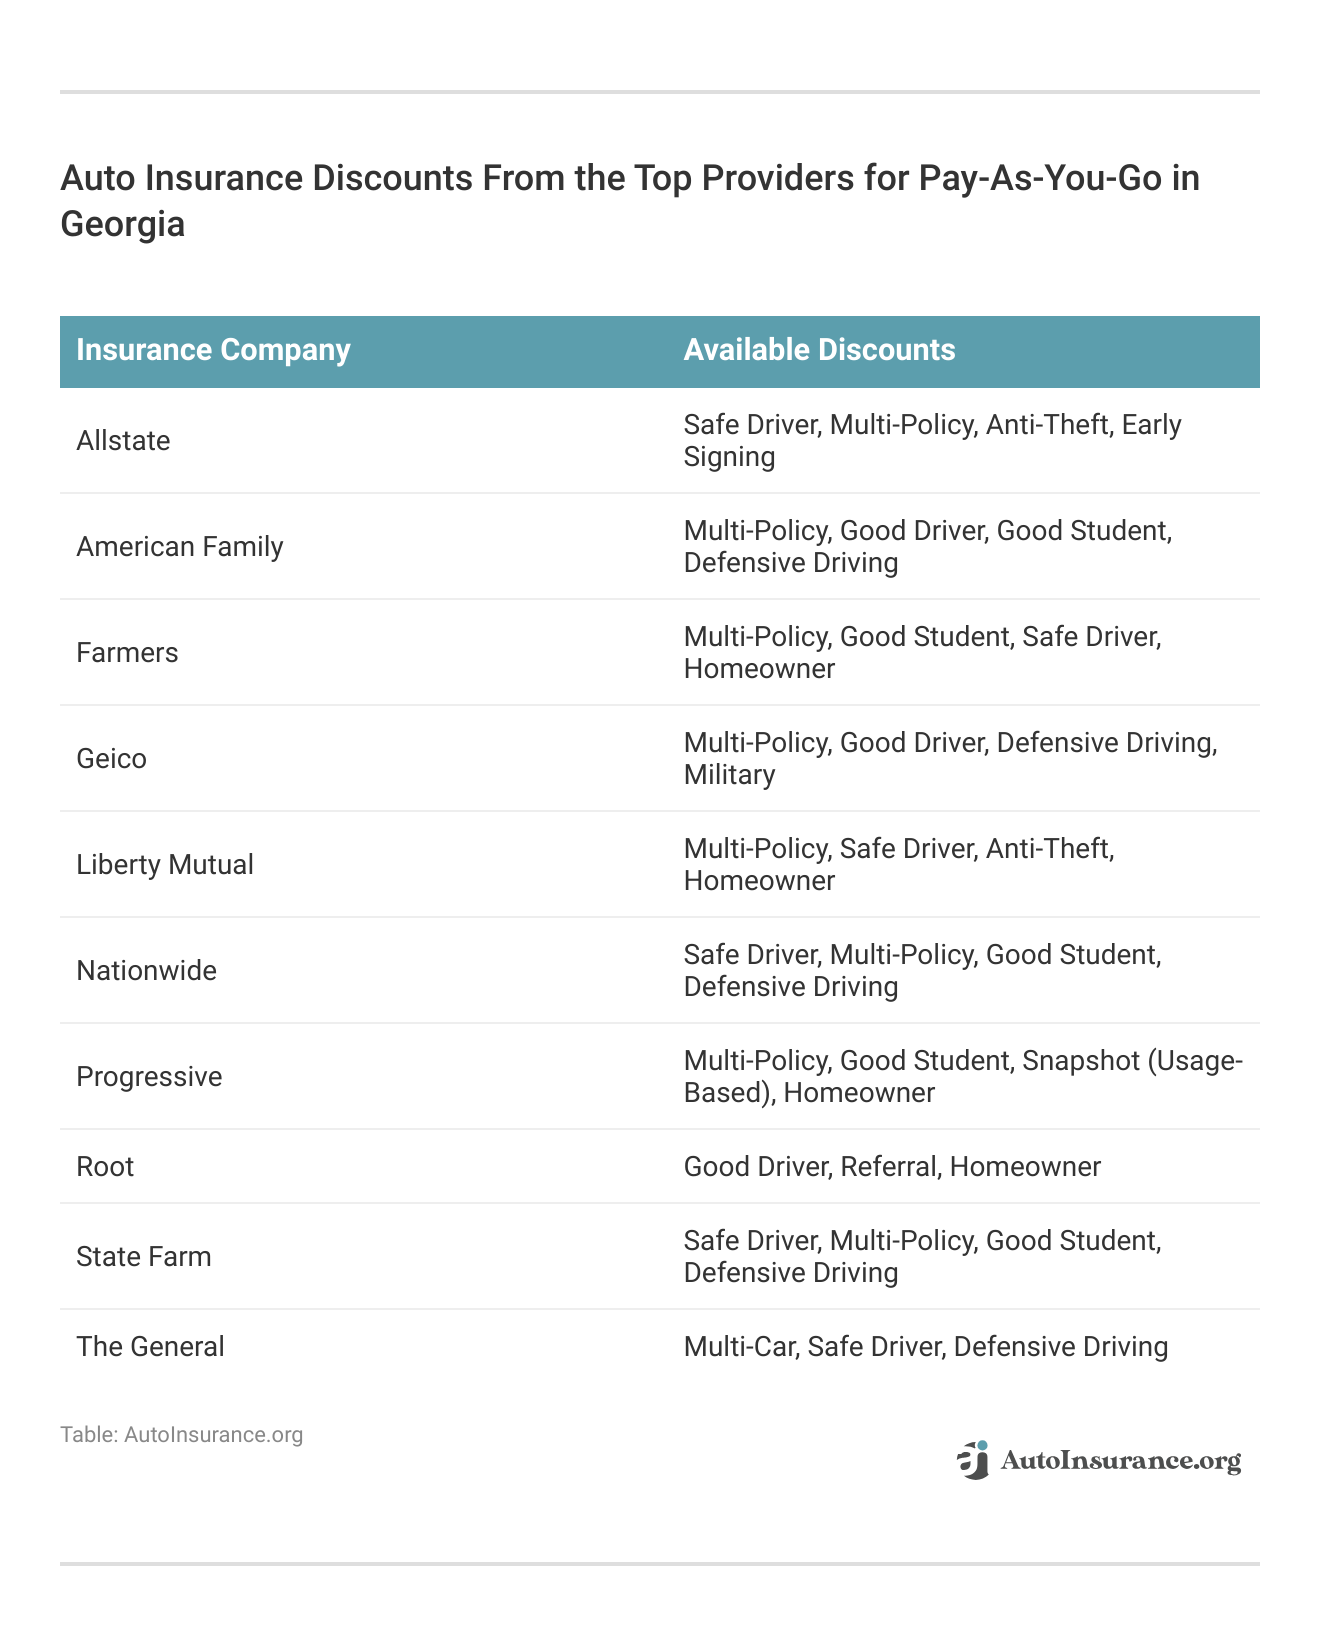 <h3>Auto Insurance Discounts From the Top Providers for Pay-As-You-Go in Georgia</h3>